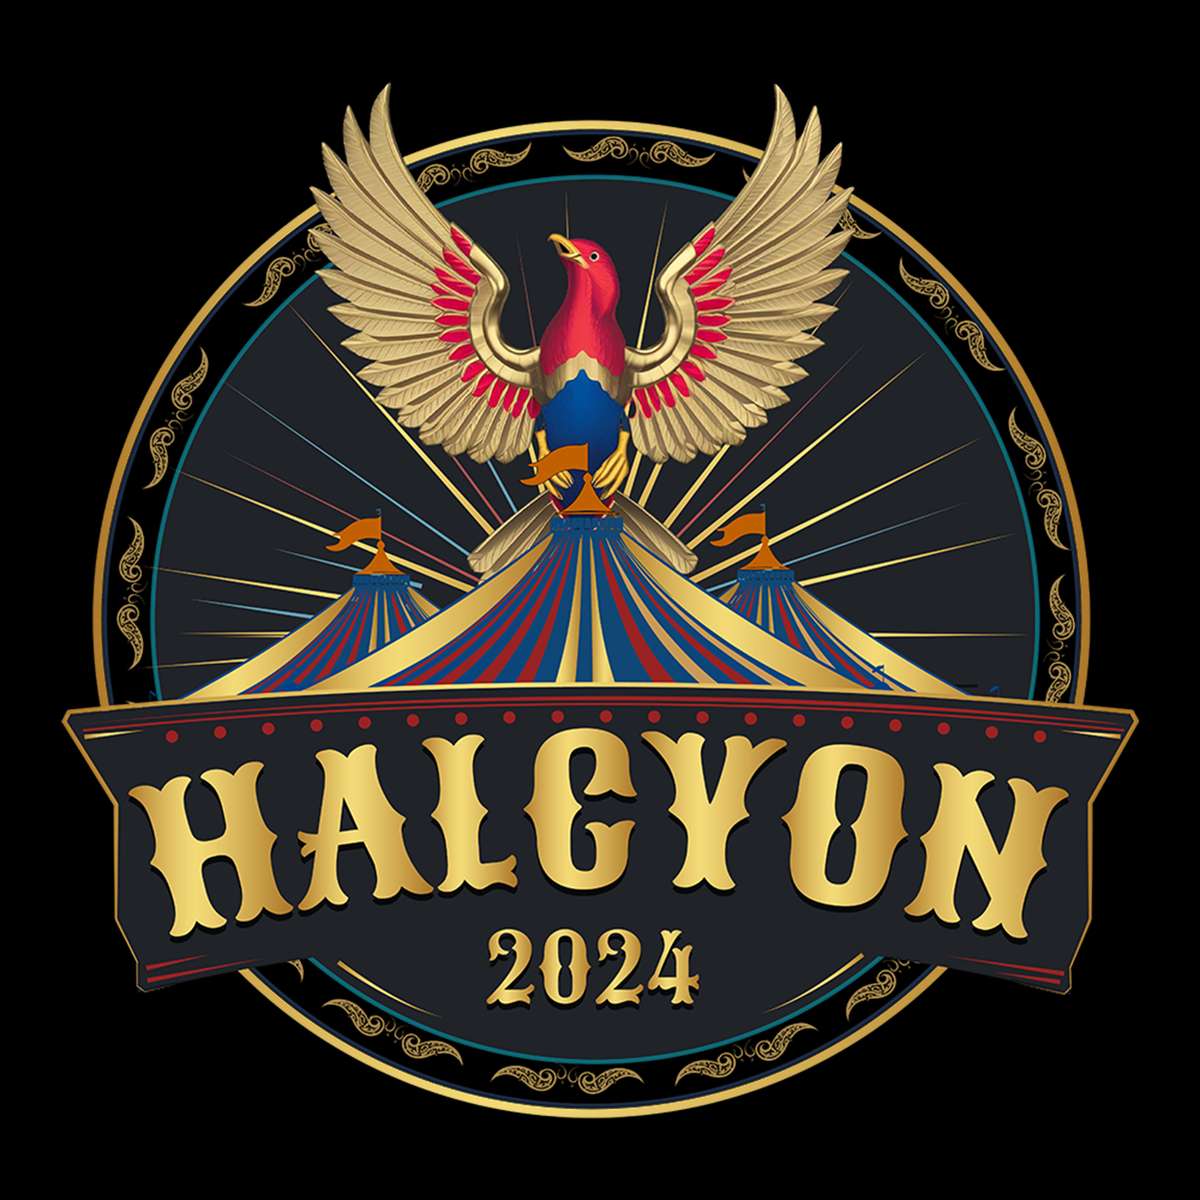 HALCYON LOGO puzzle online from photo